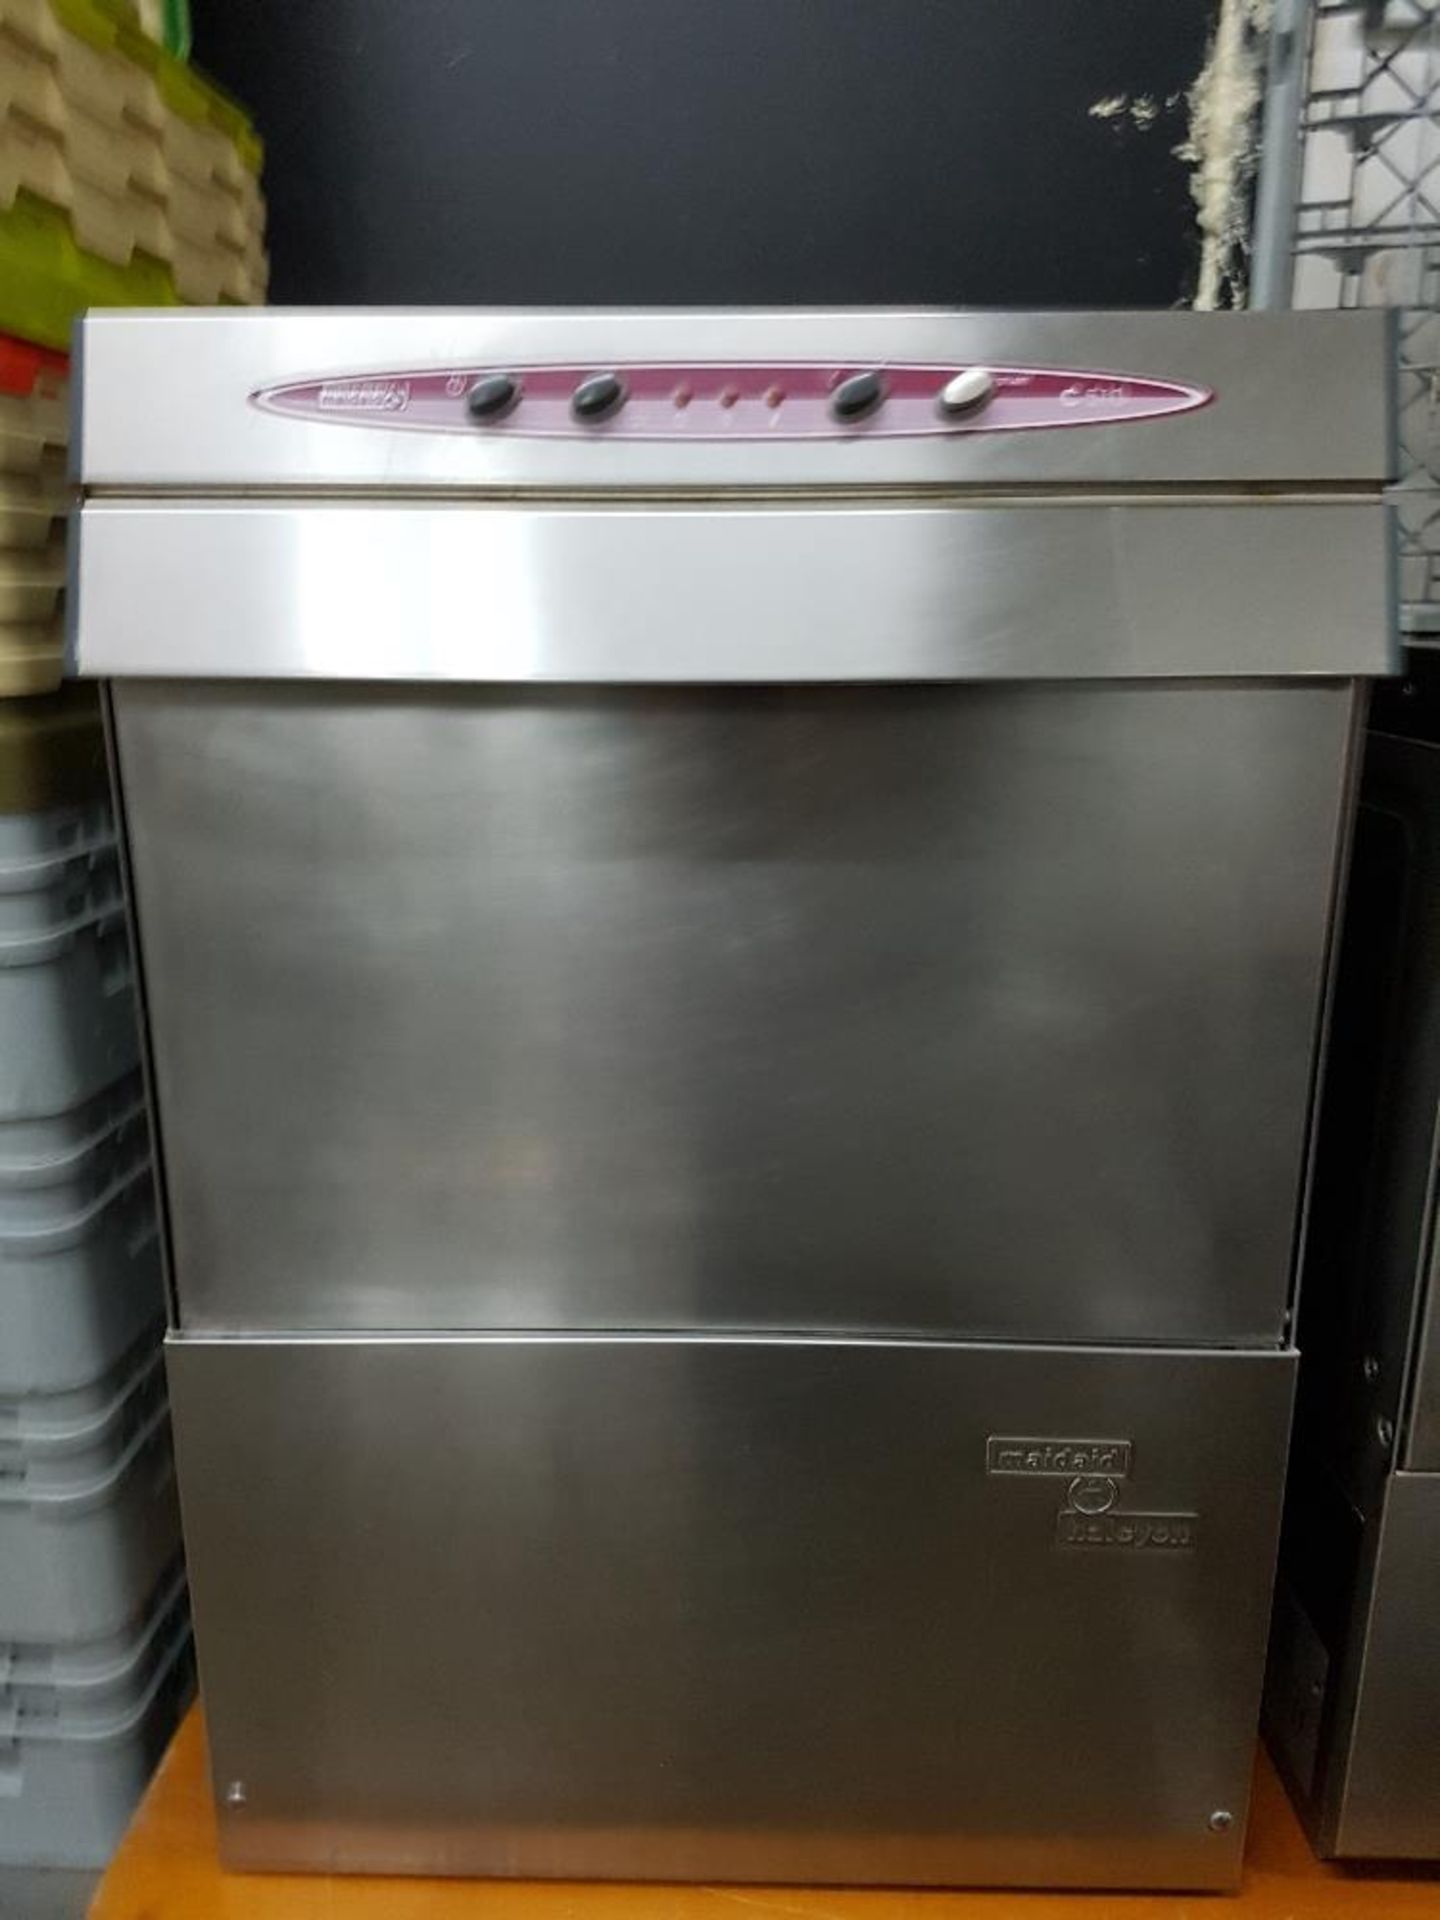 Maid Aid C510 DP Under Counter Dishwasher -W680mm x H820mmxD670mm – Fully Serviced – Clean -1ph- New